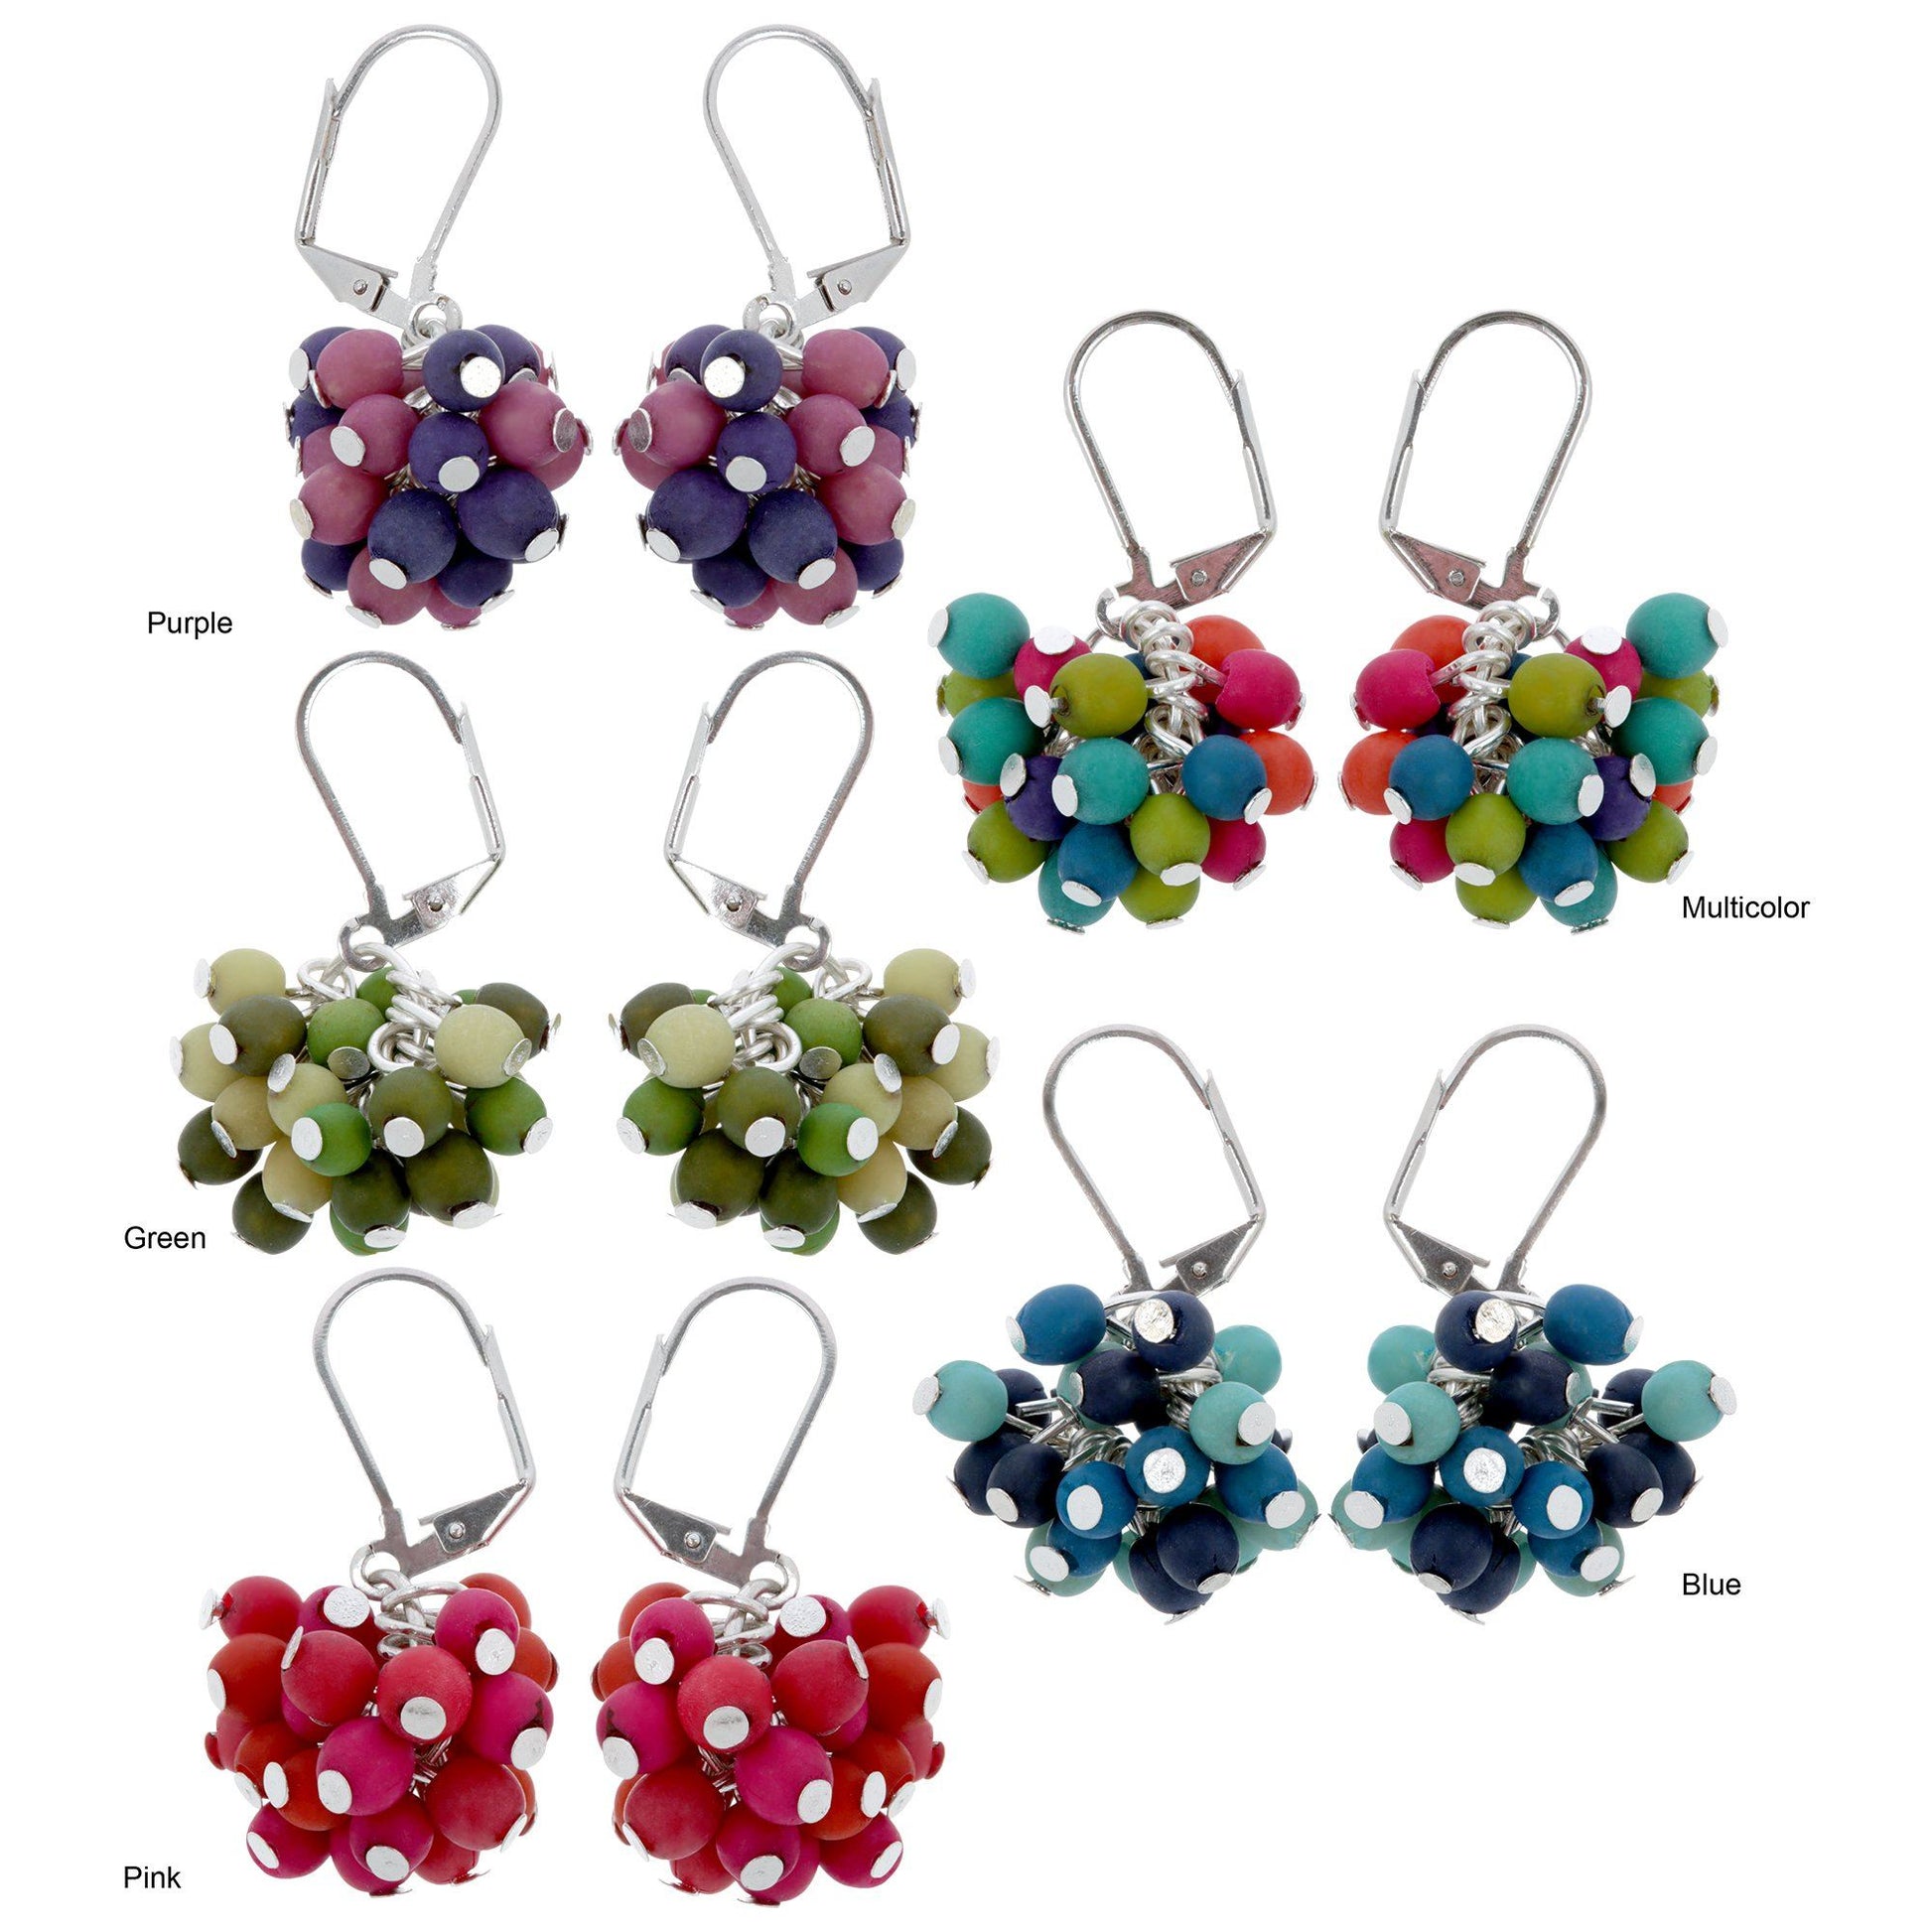 Her Colorful Nature Earrings